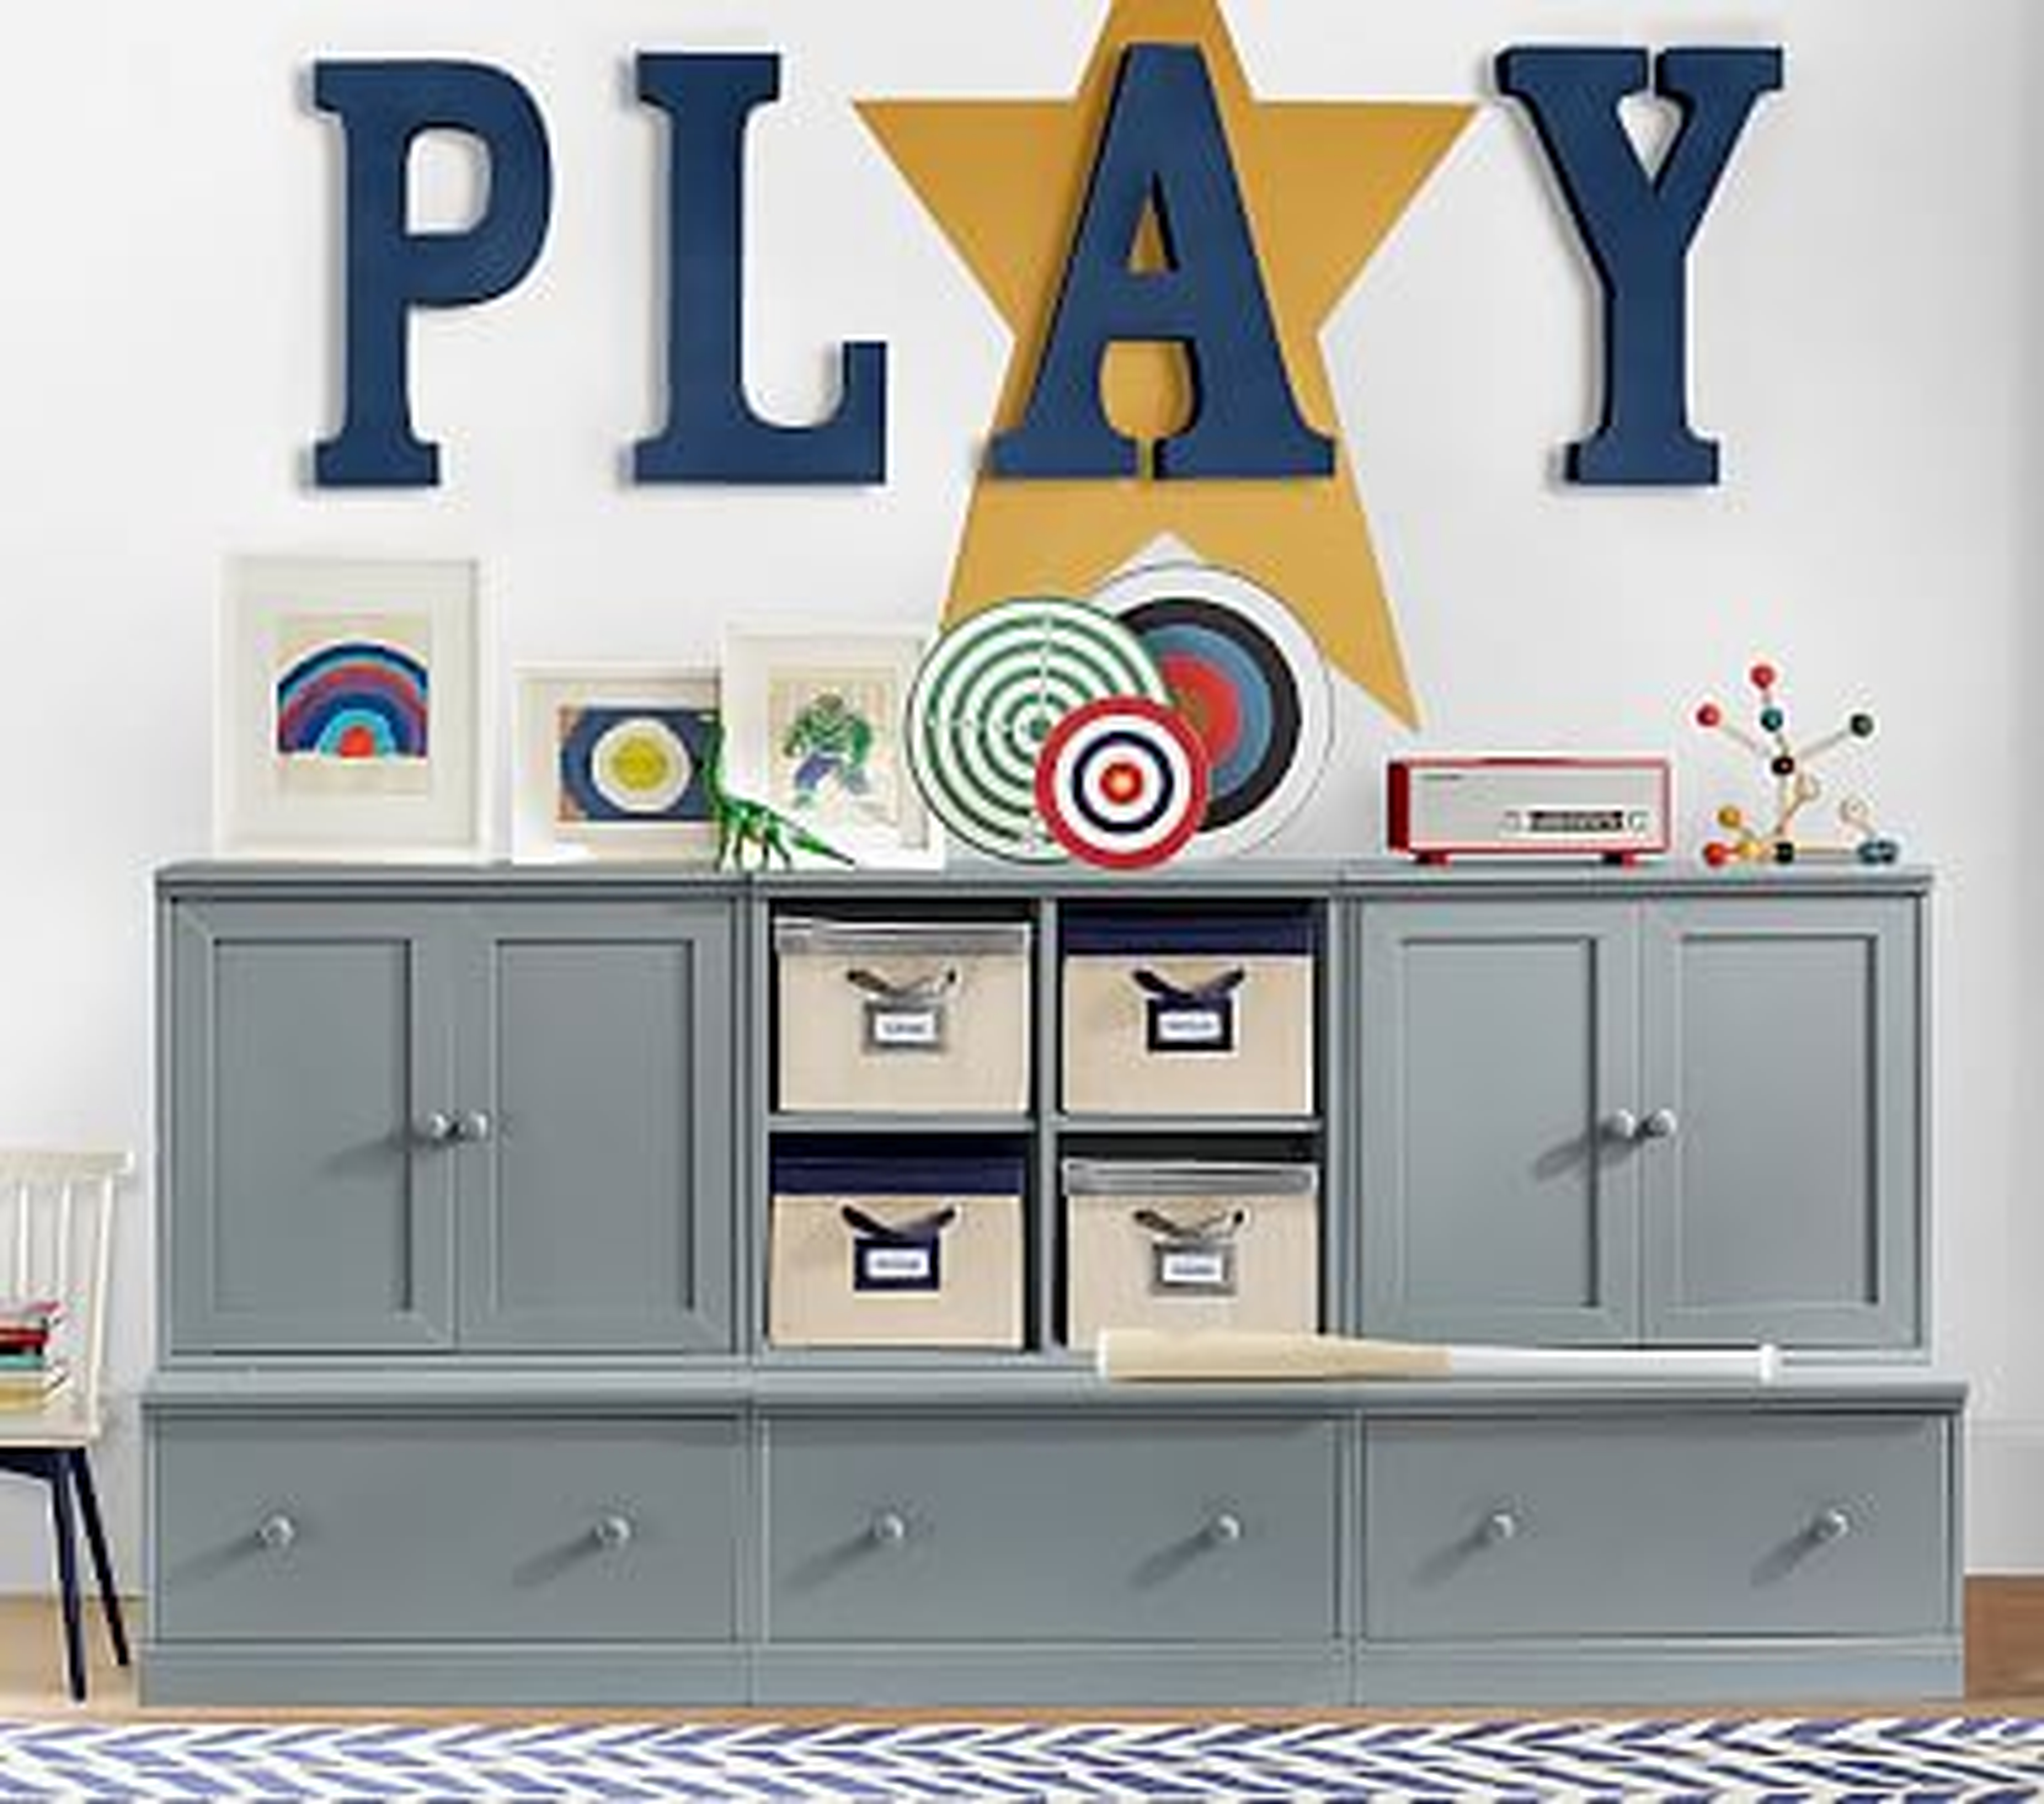 Cameron 1 Cubby, 2 Cabinets, & 3 Drawer Bases, Charcoal, In-Home Delivery - Pottery Barn Kids